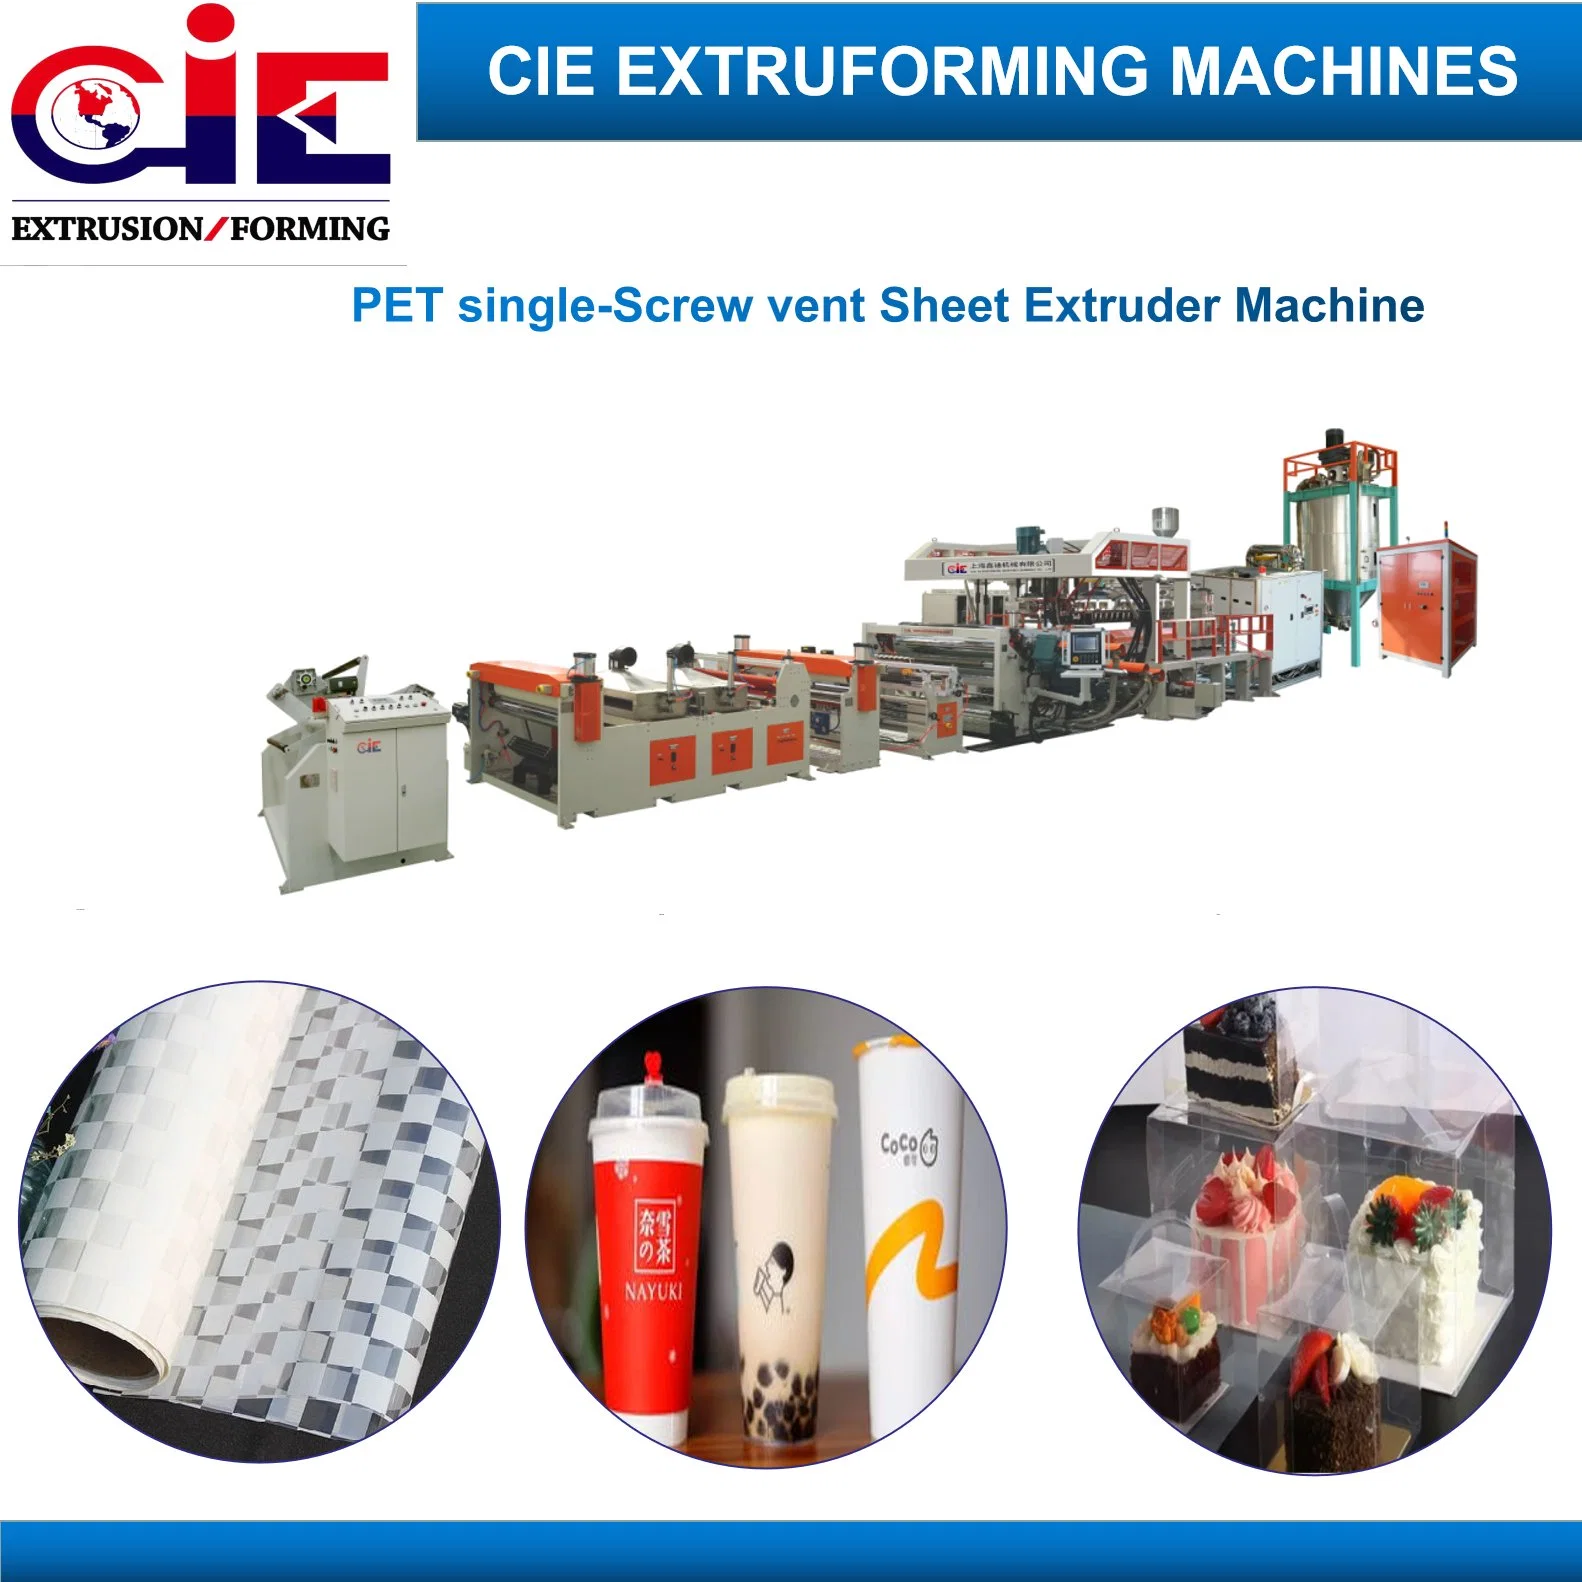 PETG Pet Sheet for Thermoforming/ Folder with Single-Screw Extruder Extrusion Equipment